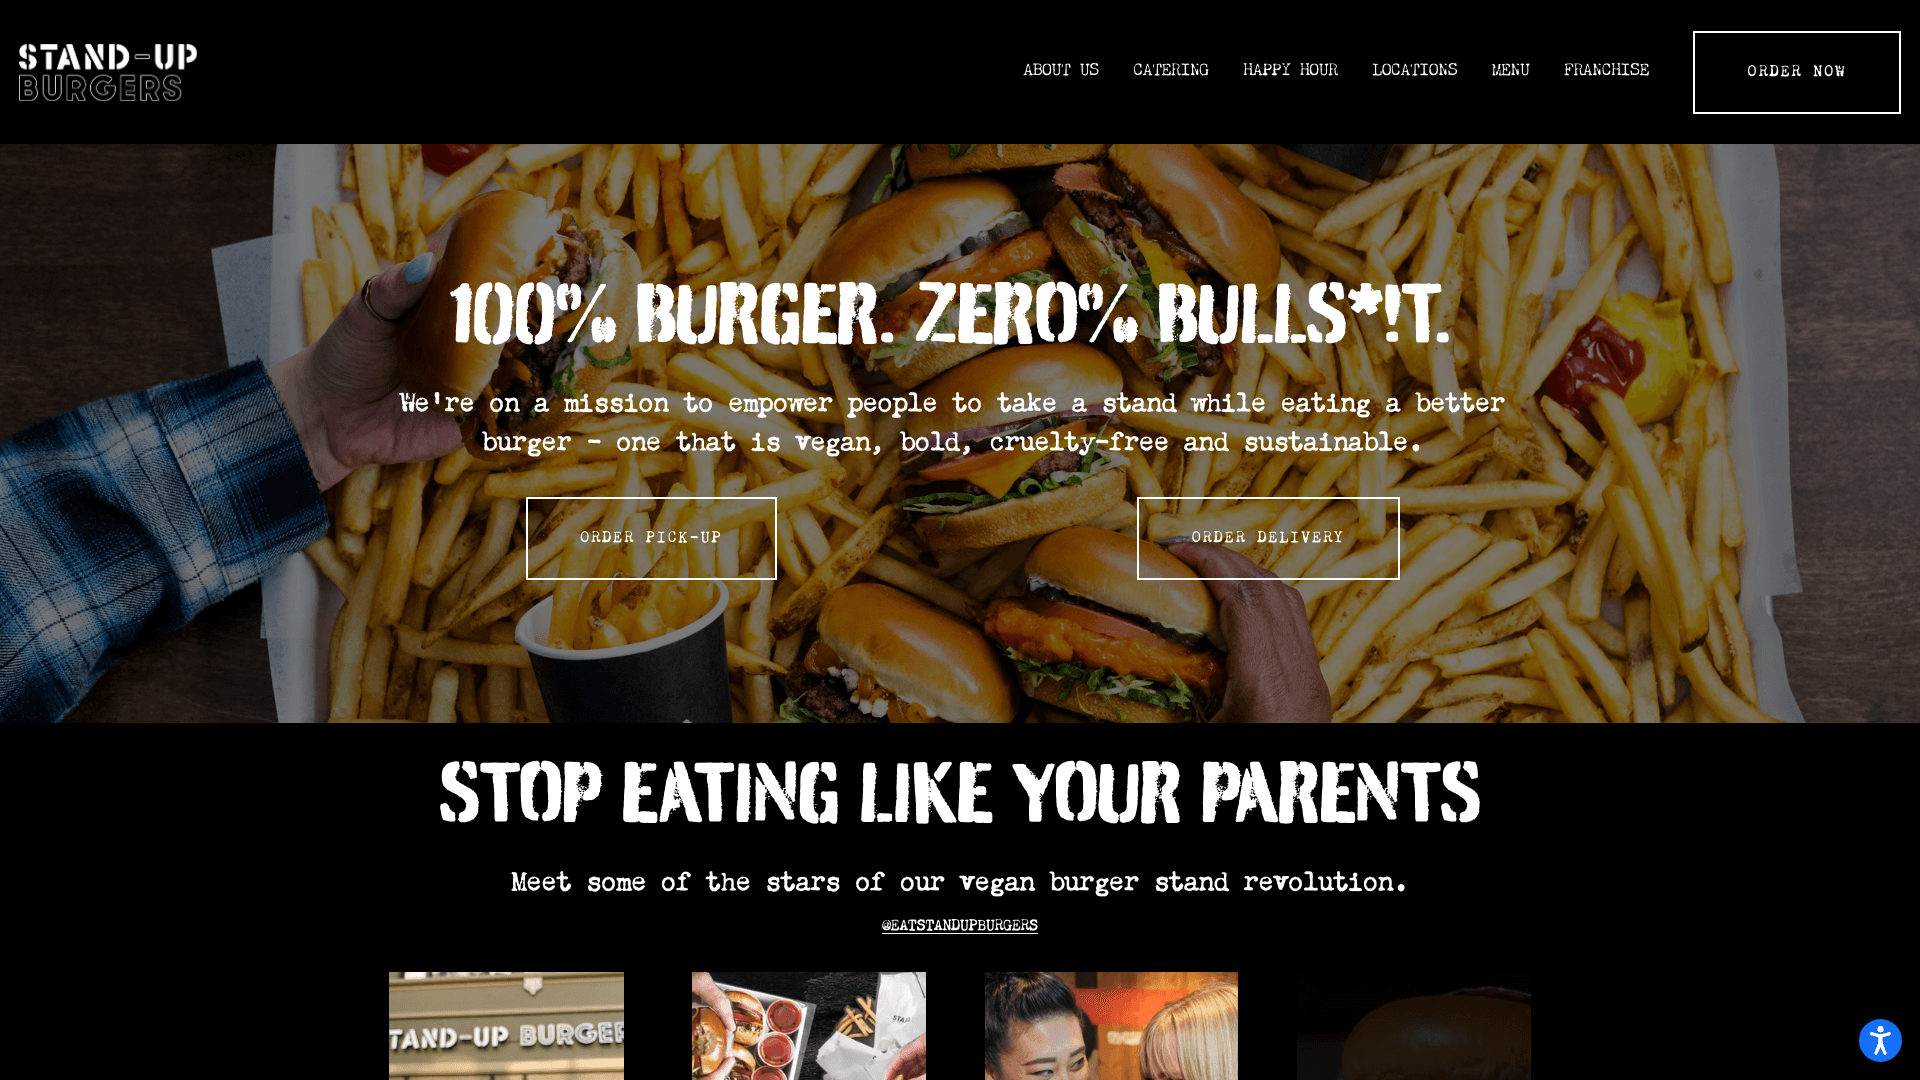 Screenshot of the Stand-Up Burgers website